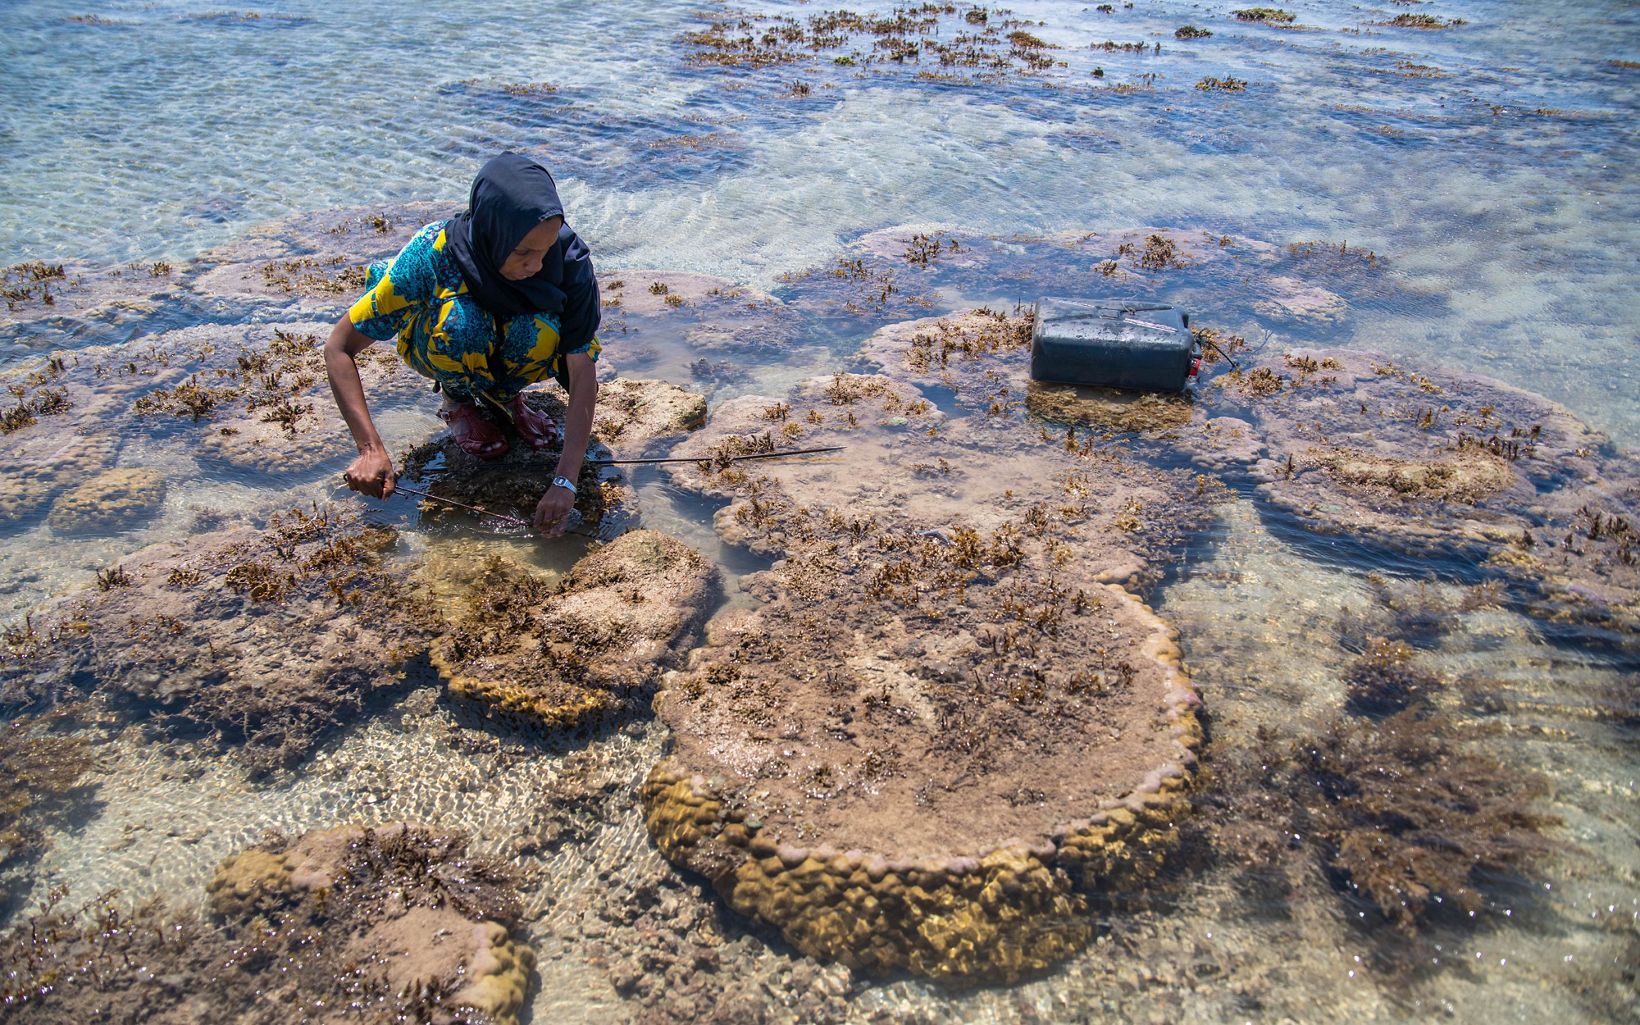 Amina Ahmed fishes for octopuses after a no-take zone is reopened on Pate Island, Lamu, Kenya.